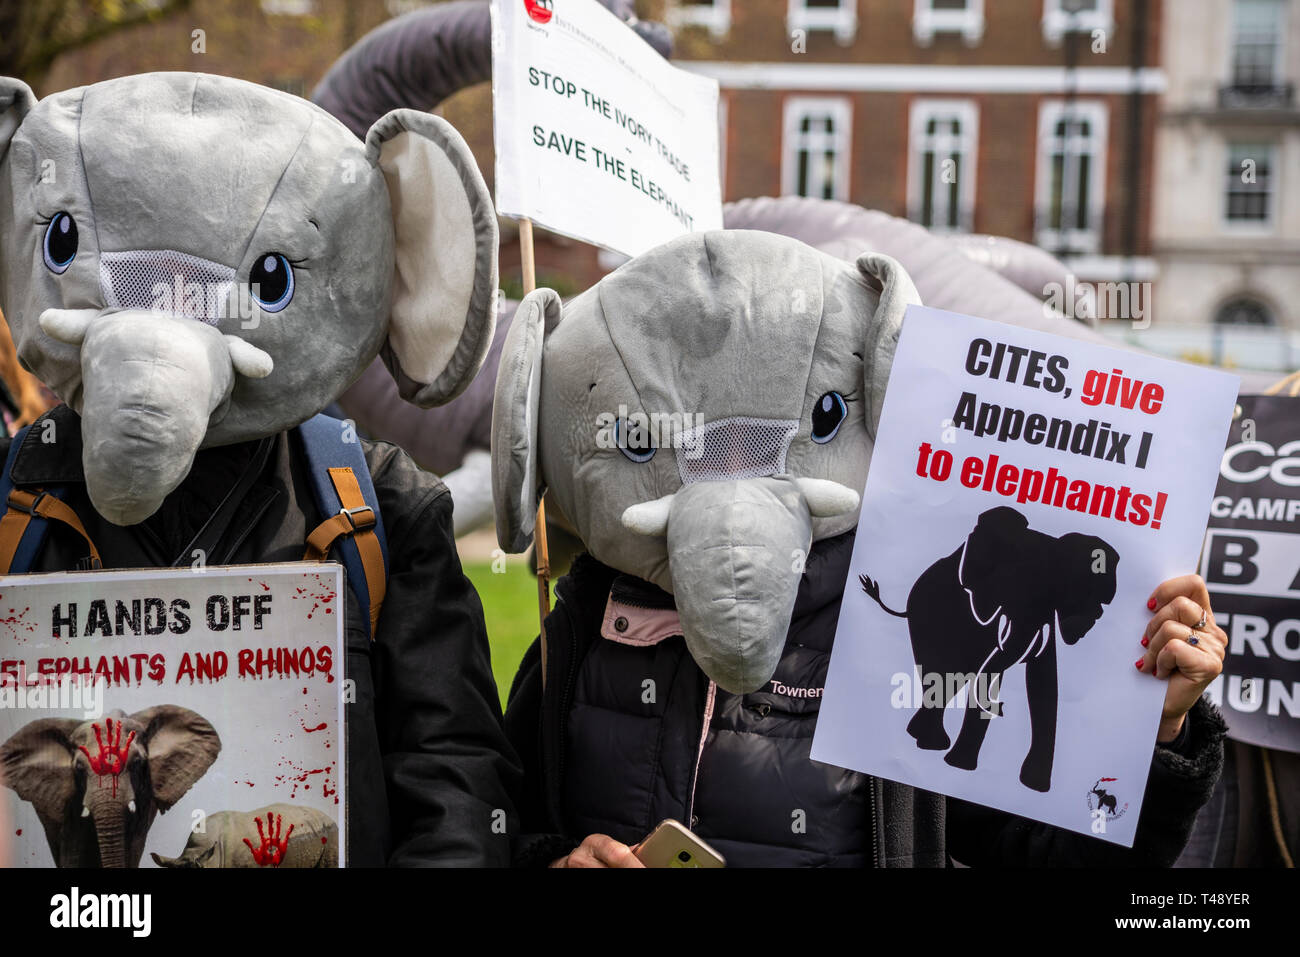 Protesters at a stop trophy hunting and ivory trade protest rally, London, UK. CITES give Appendix I to elephants. Elephant costume Stock Photo